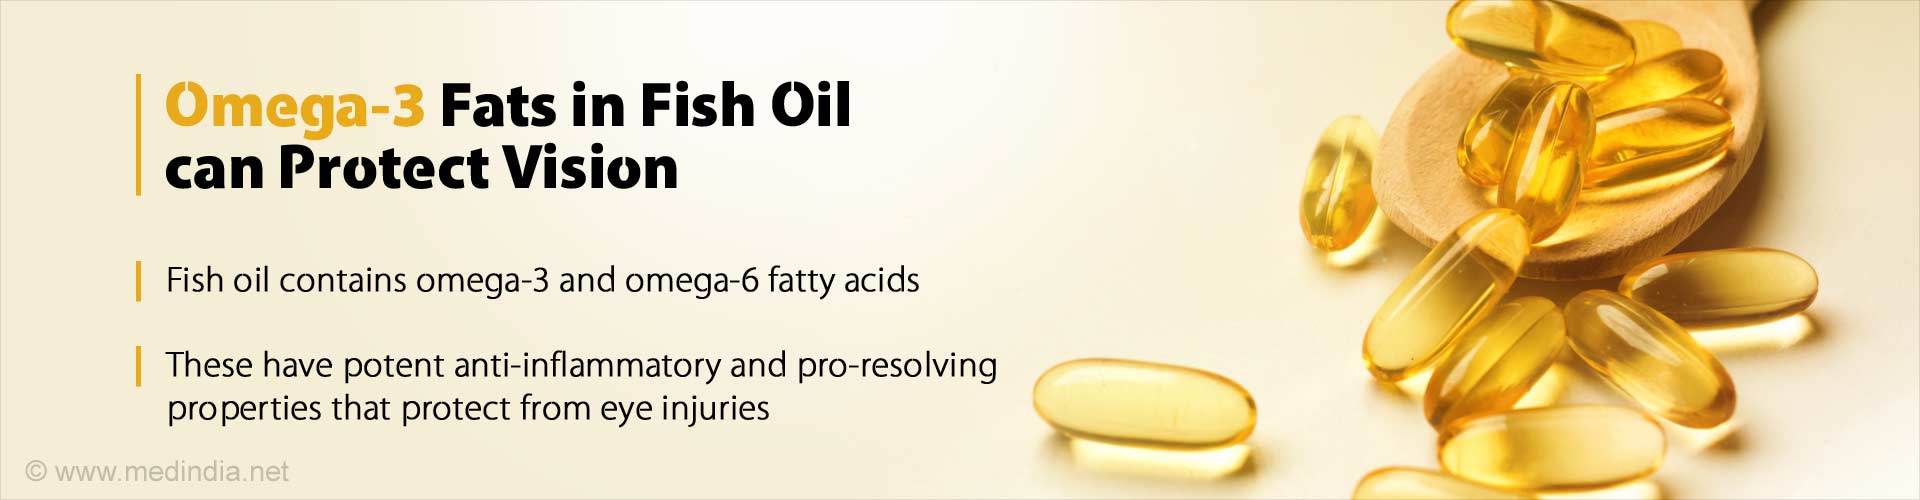 Omega-3 Fats in Fish Oil can Protect Vision
- Fish oil contains omega-3 and omega-6 fatty acids
- These have potent anti-inflammatory and pro-resolving properties that protect from eye injuries
